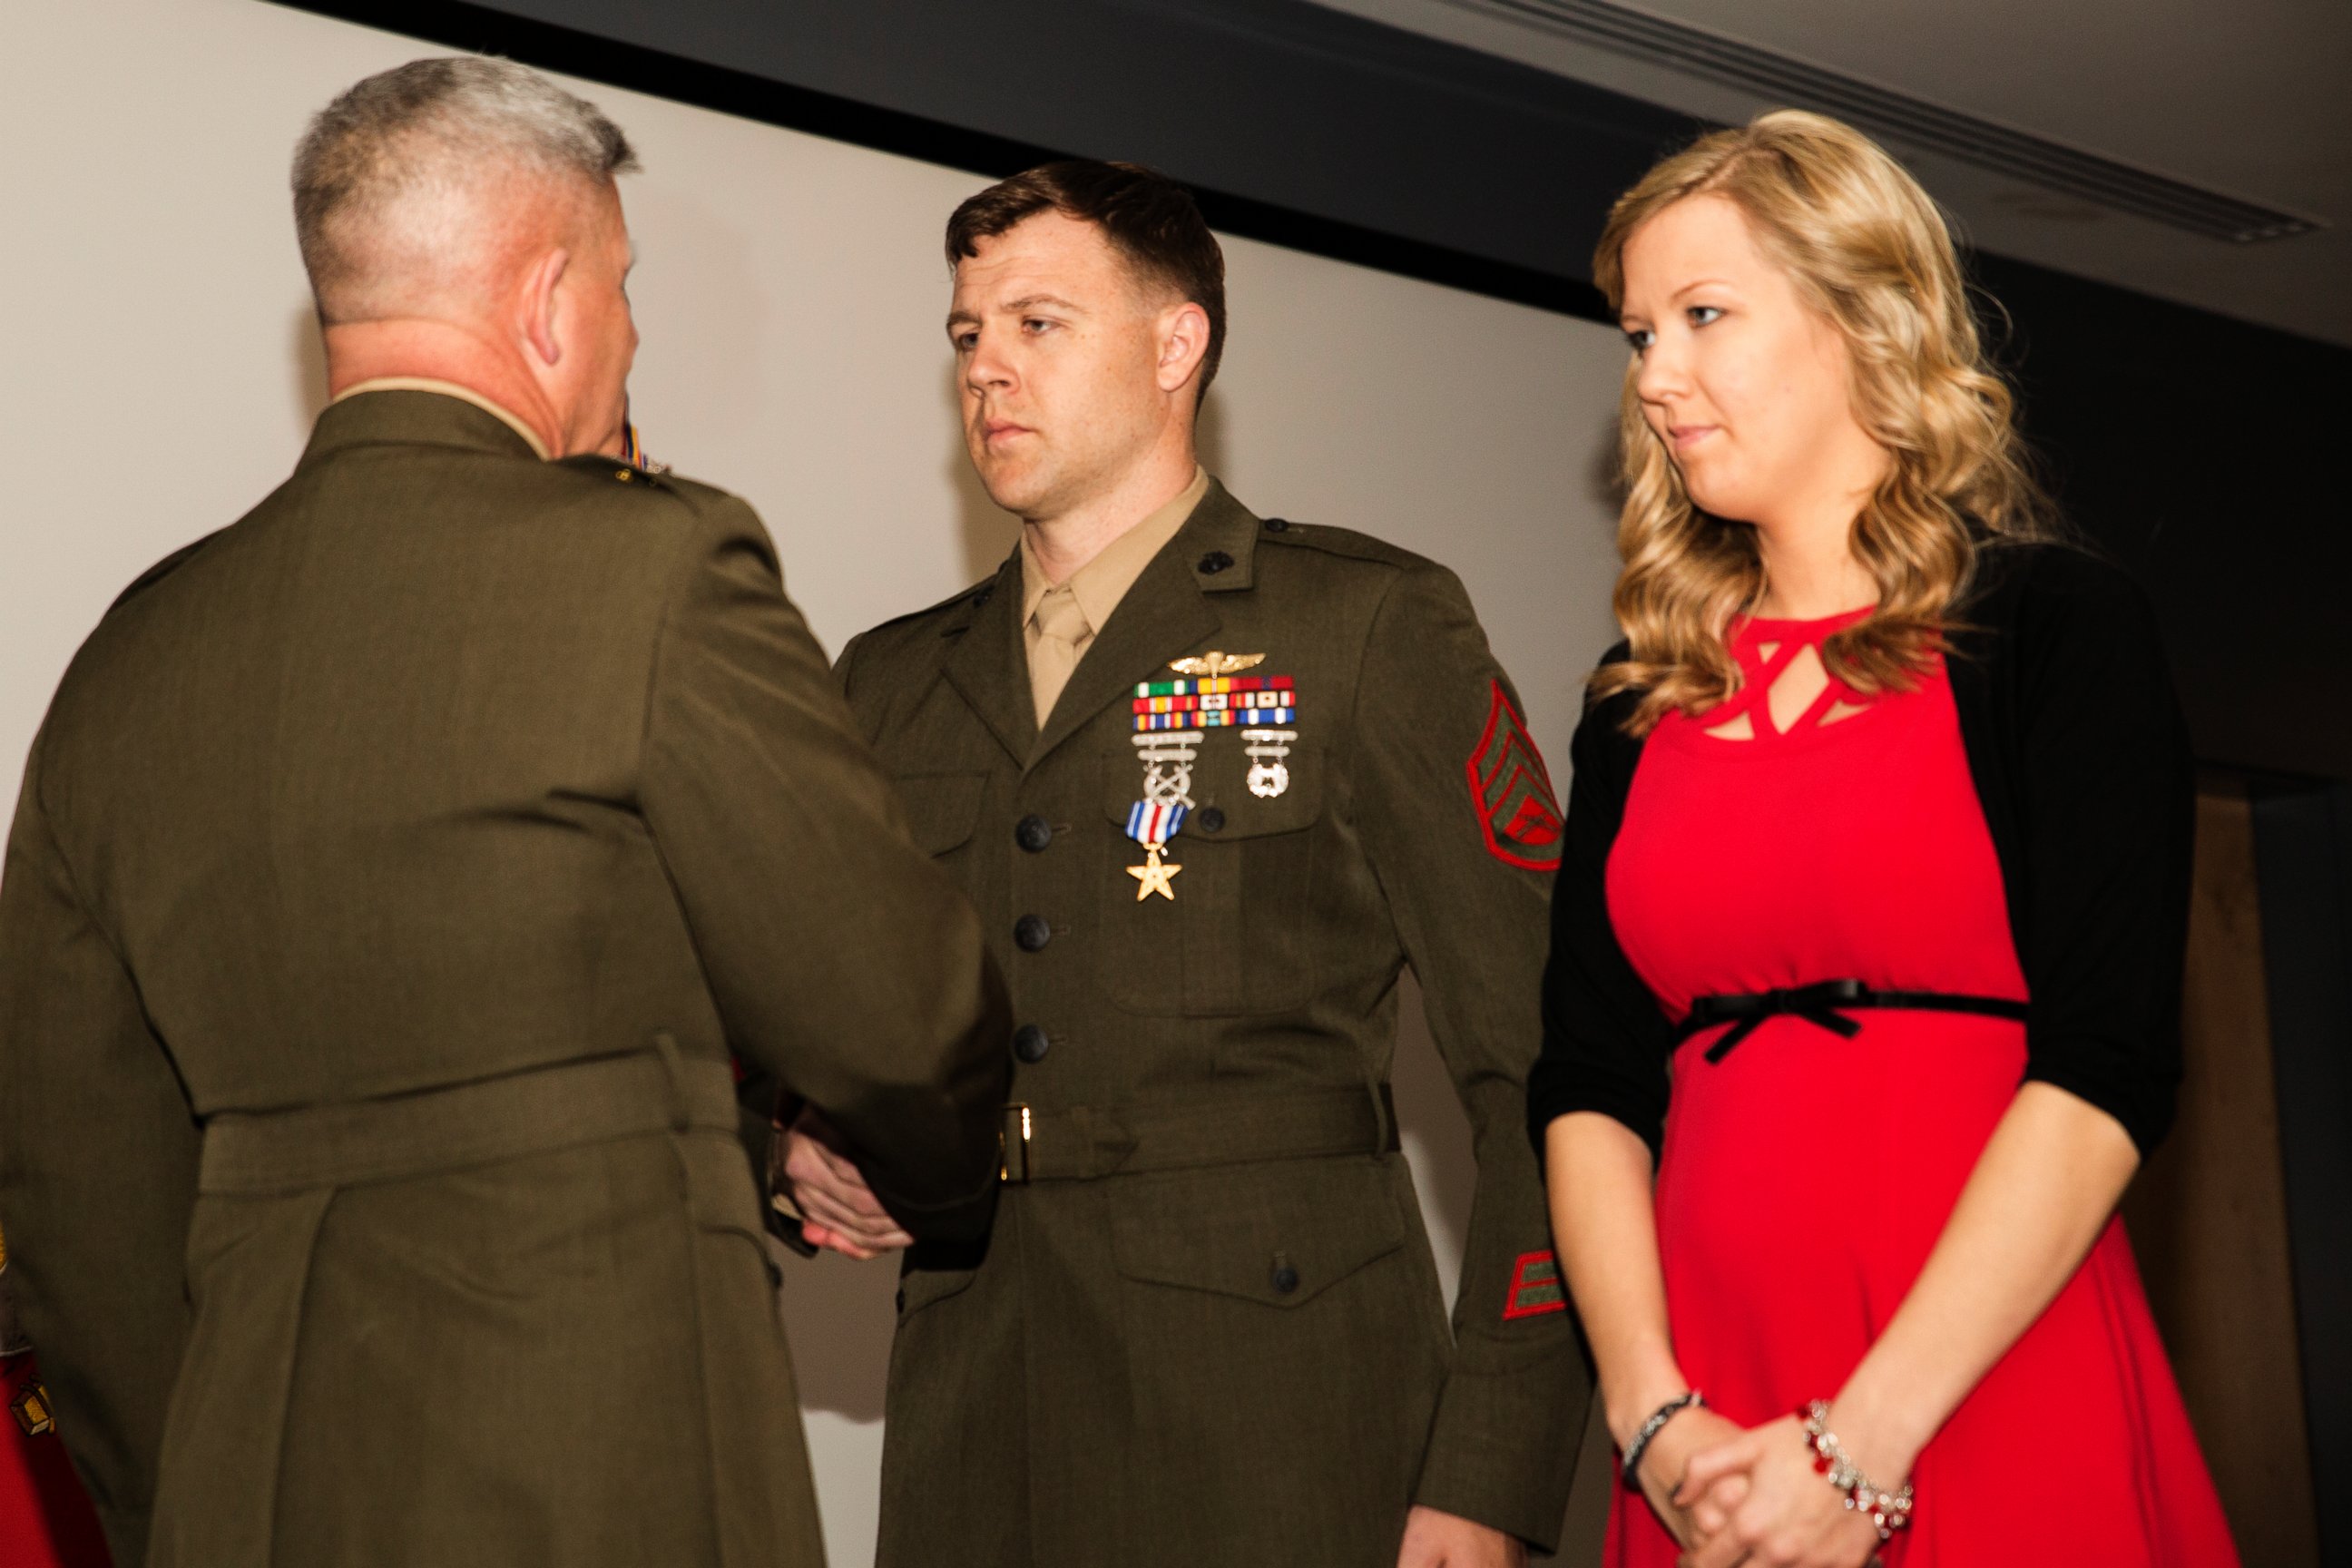 PHOTO: Major Gen. Joseph L. Osterman, commander, U.S. Marine Corps Forces, Special Operations Command, awards Staff Sgt. Andrew C. Seif the Silver Star Medal during a ceremony at Stone Bay aboard Marine Corps Base Camp Lejeune, N.C., March 6, 2015.